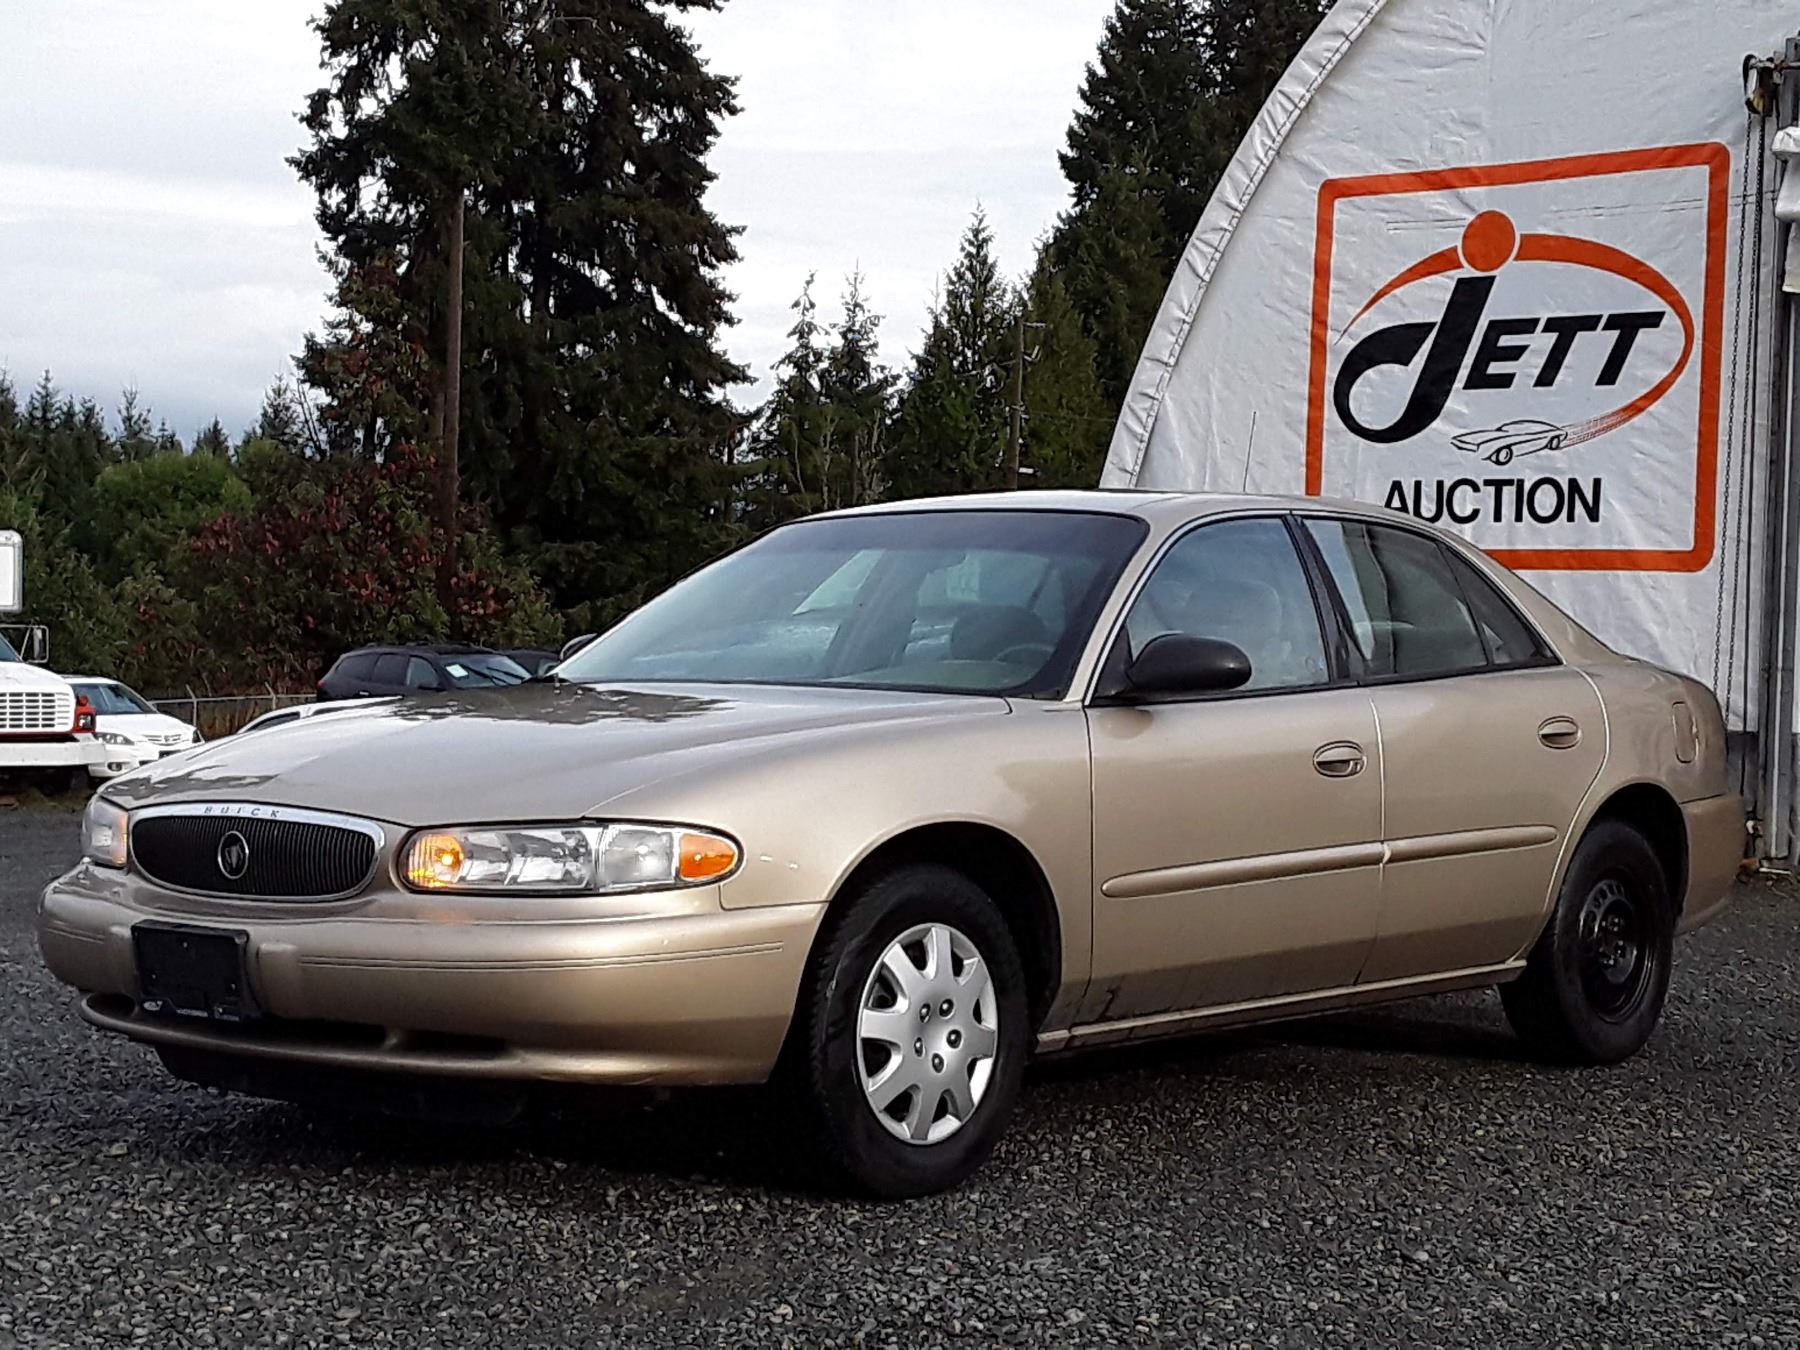 A3 -- 2005 BUICK CENTURY CUSTOM, GOLD, 144,021 KMS "NO RESERVE"